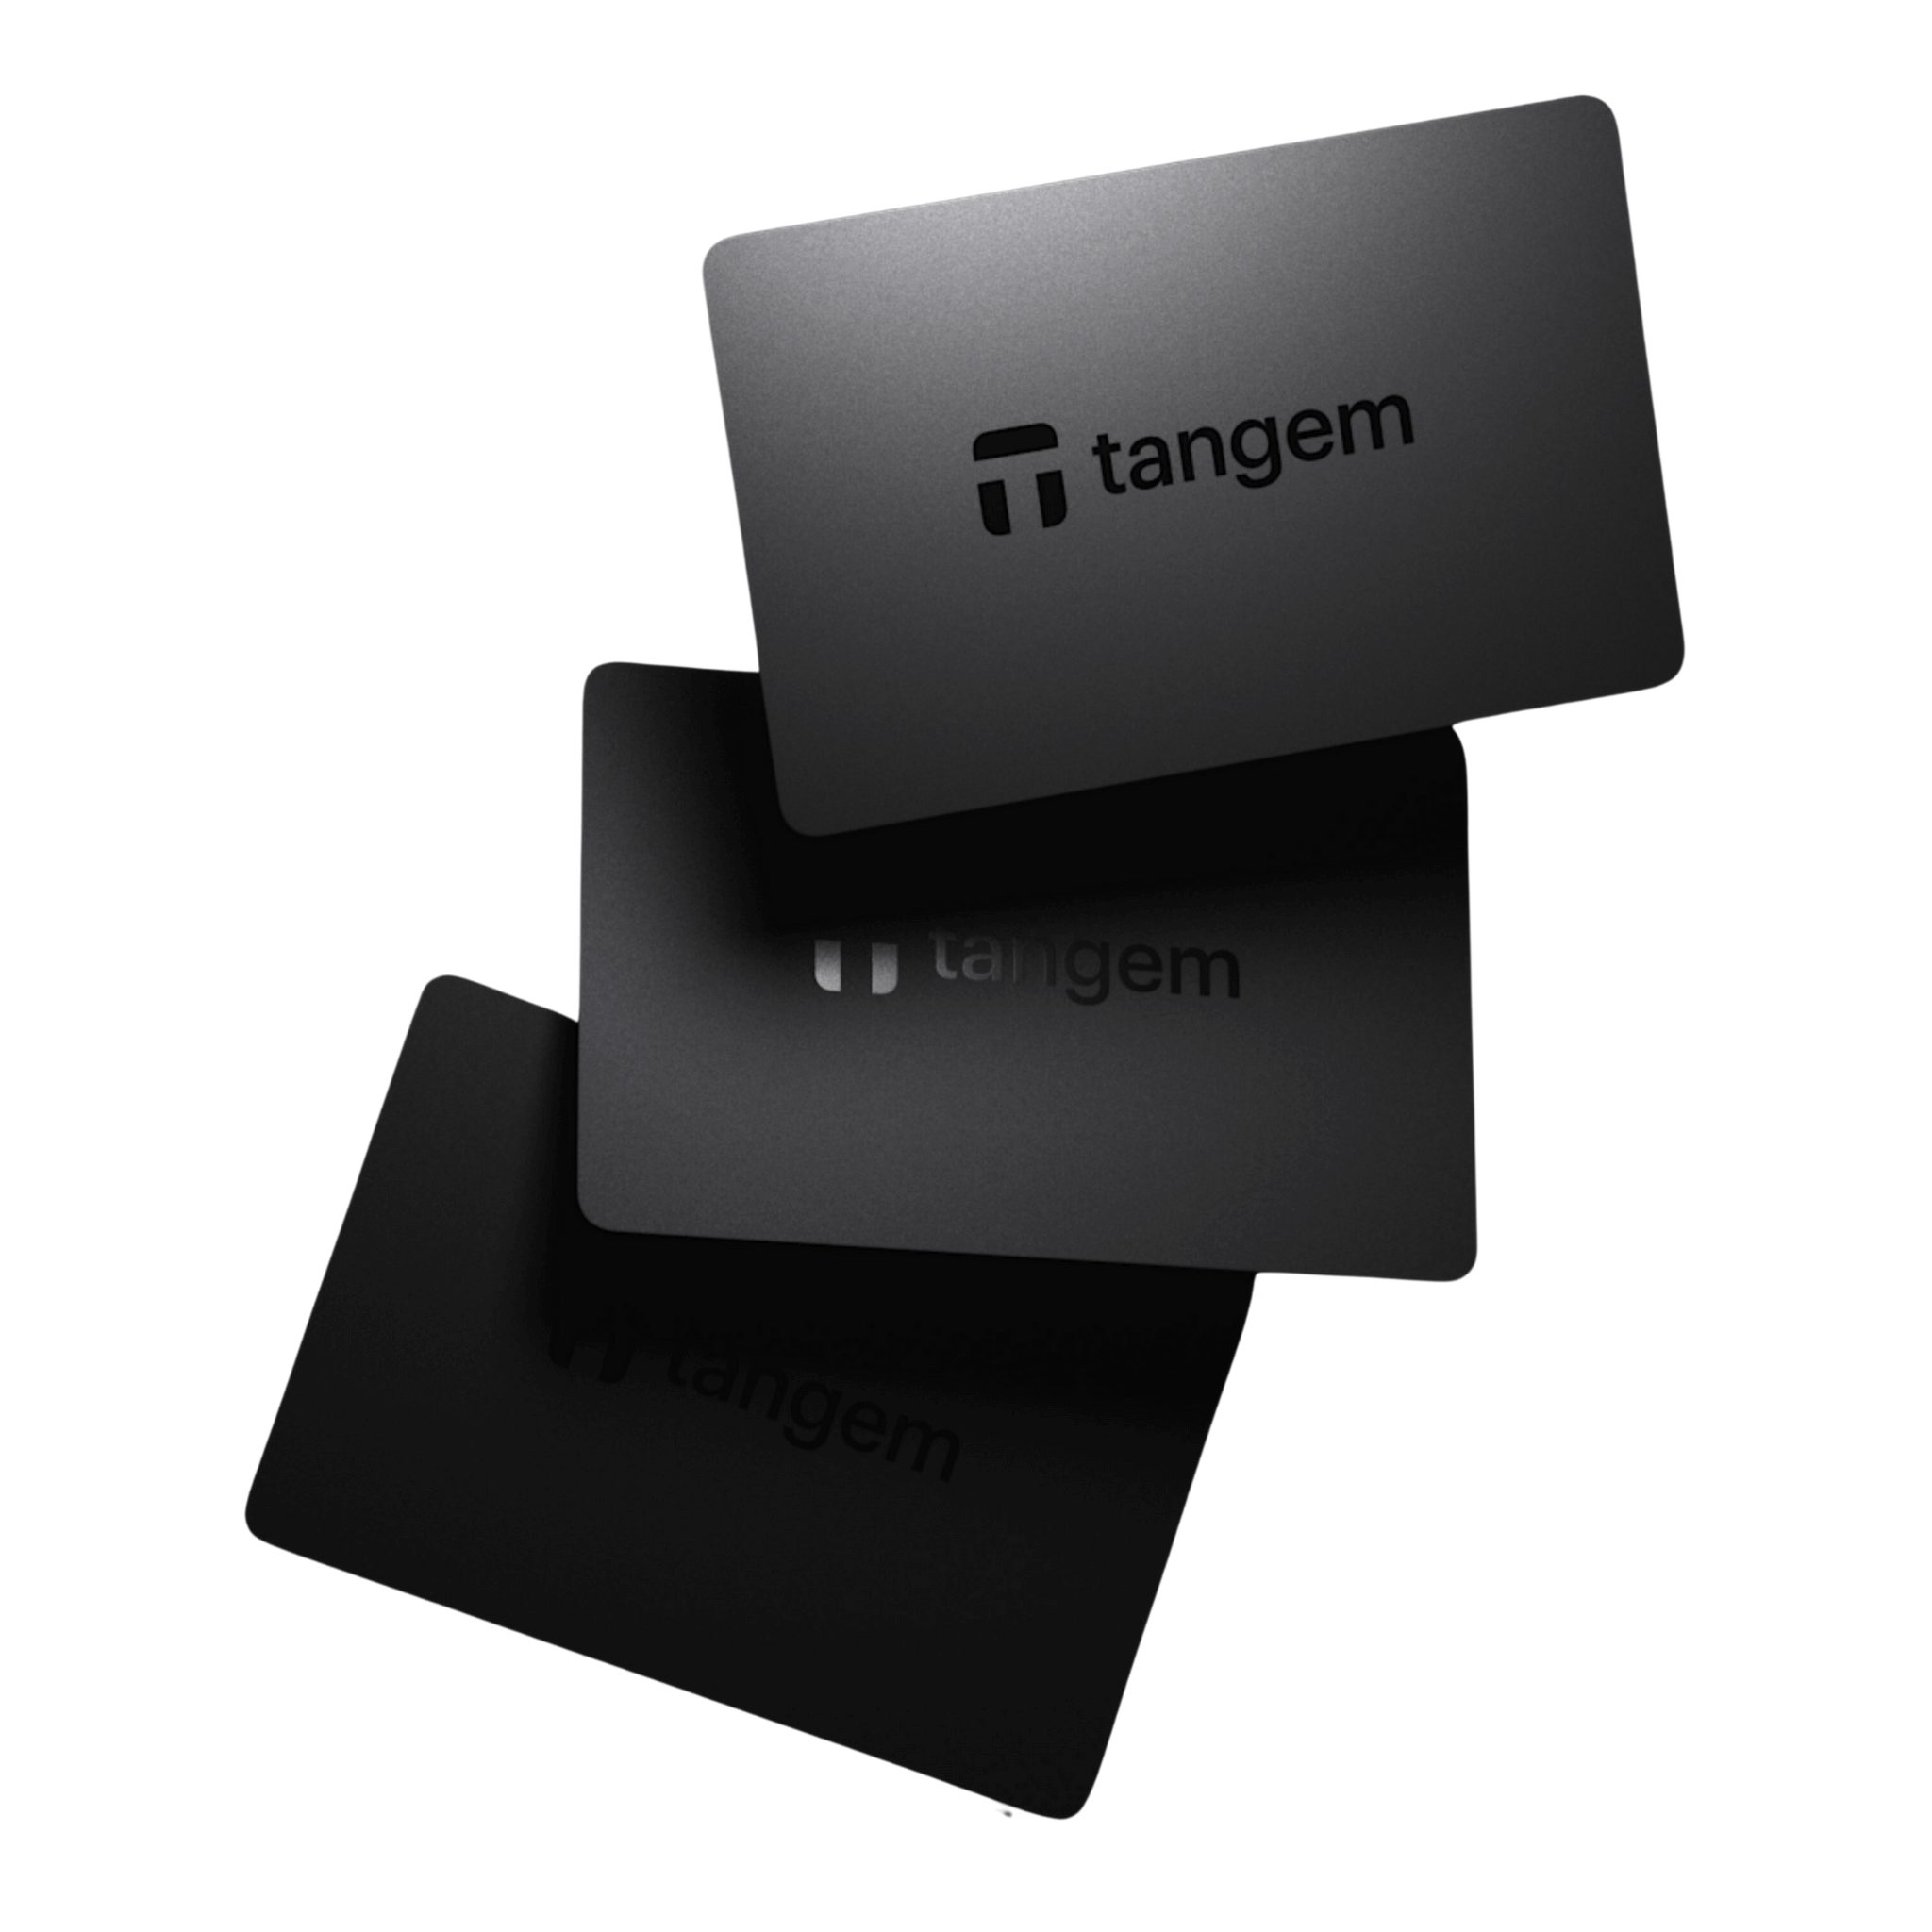 Tangem Wallet 2.0 3 Card Cryptocurrency Hardware Wallet Top Angle